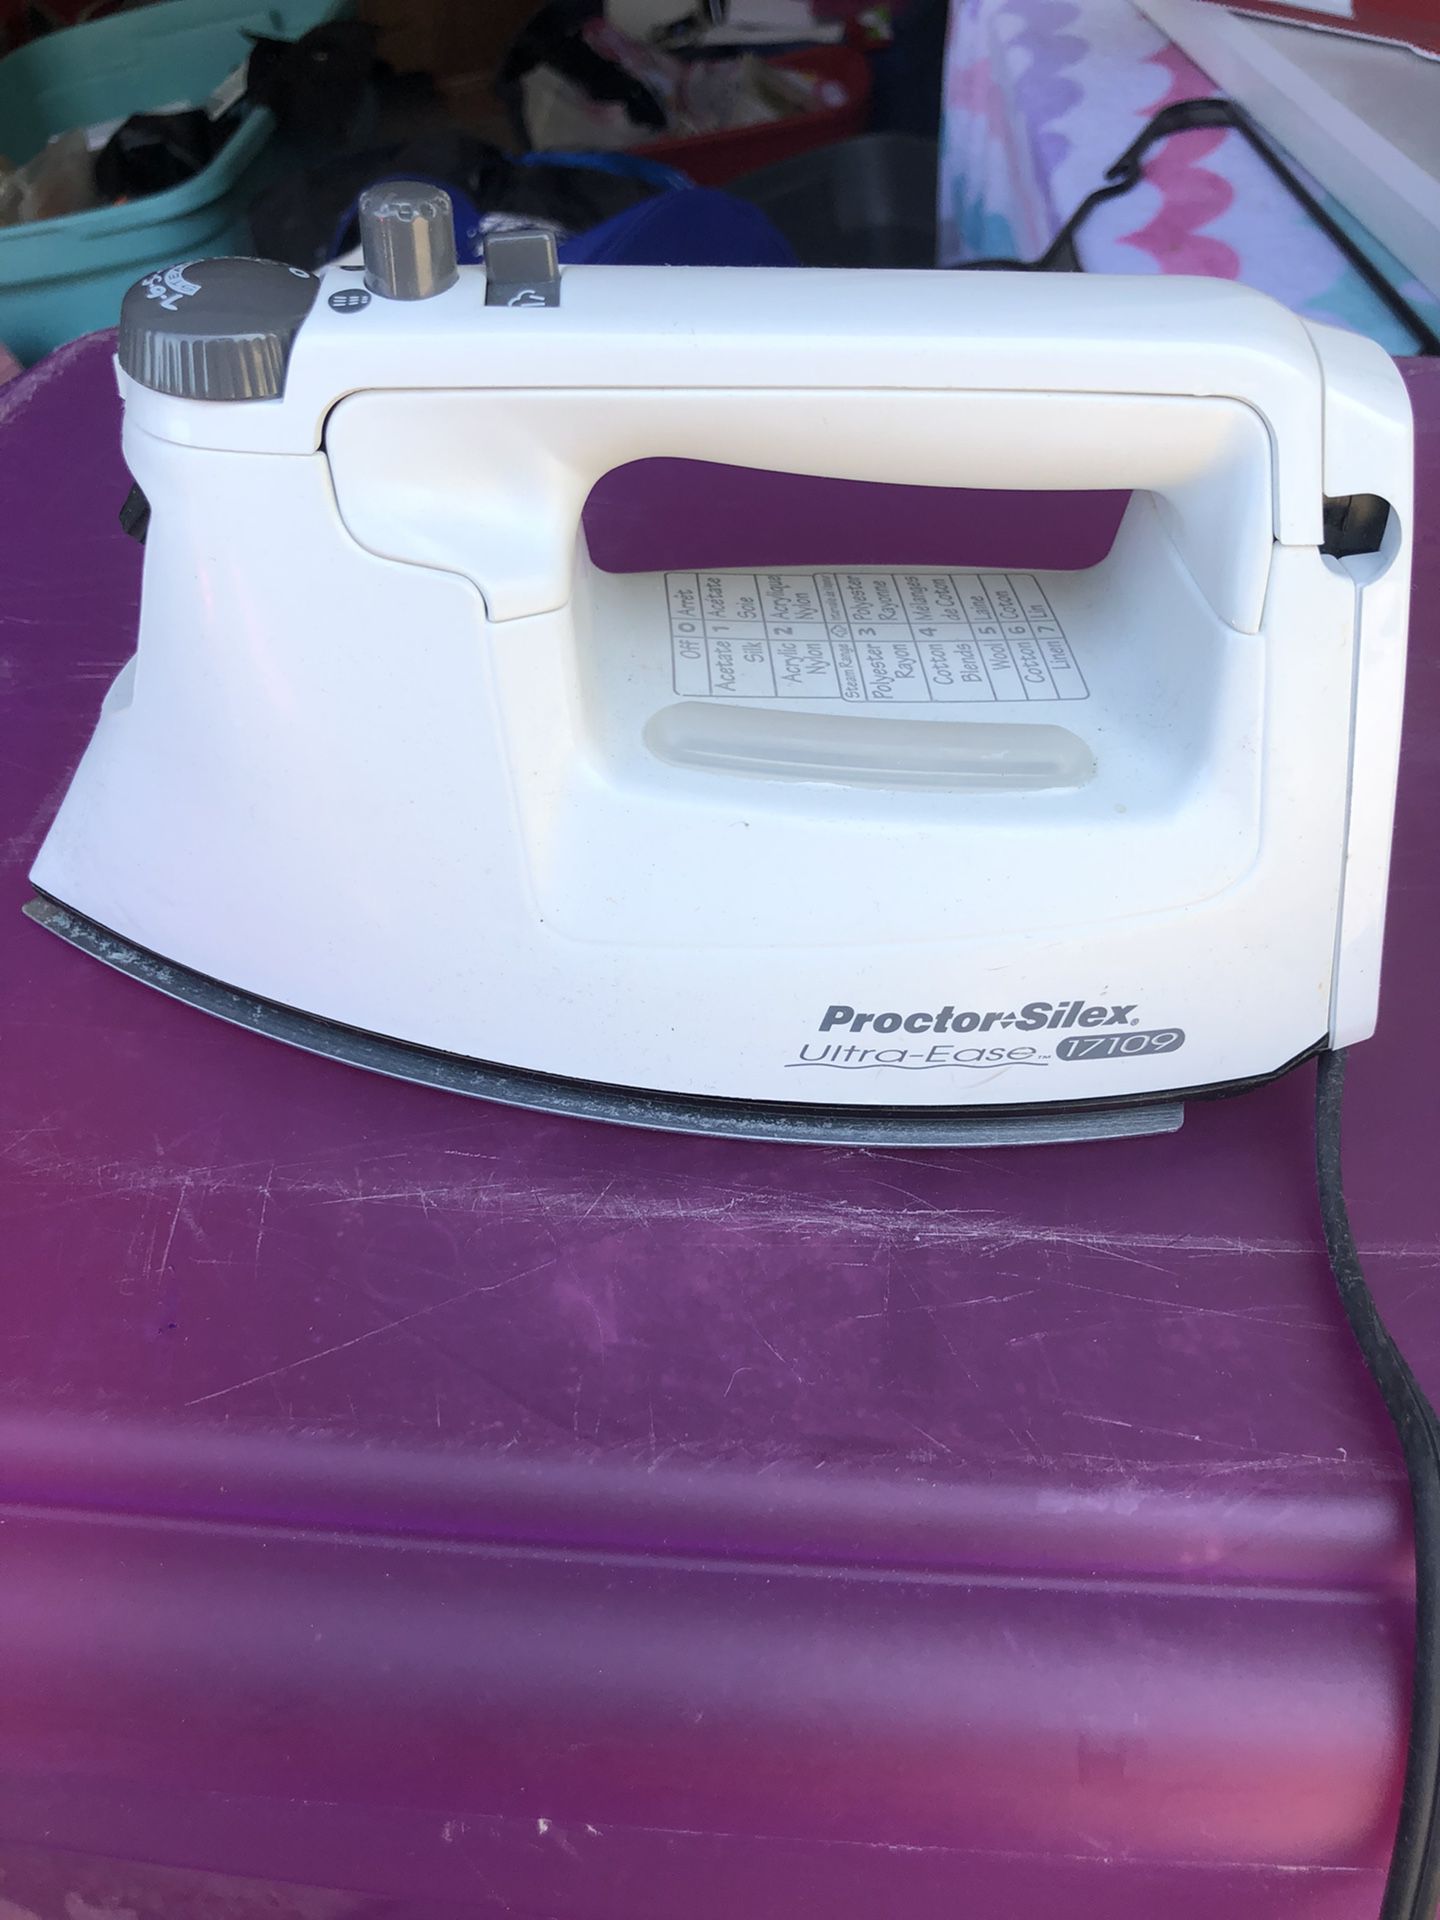 Ultra Ease Proctor Silex Electric Steam Iron, model 17109